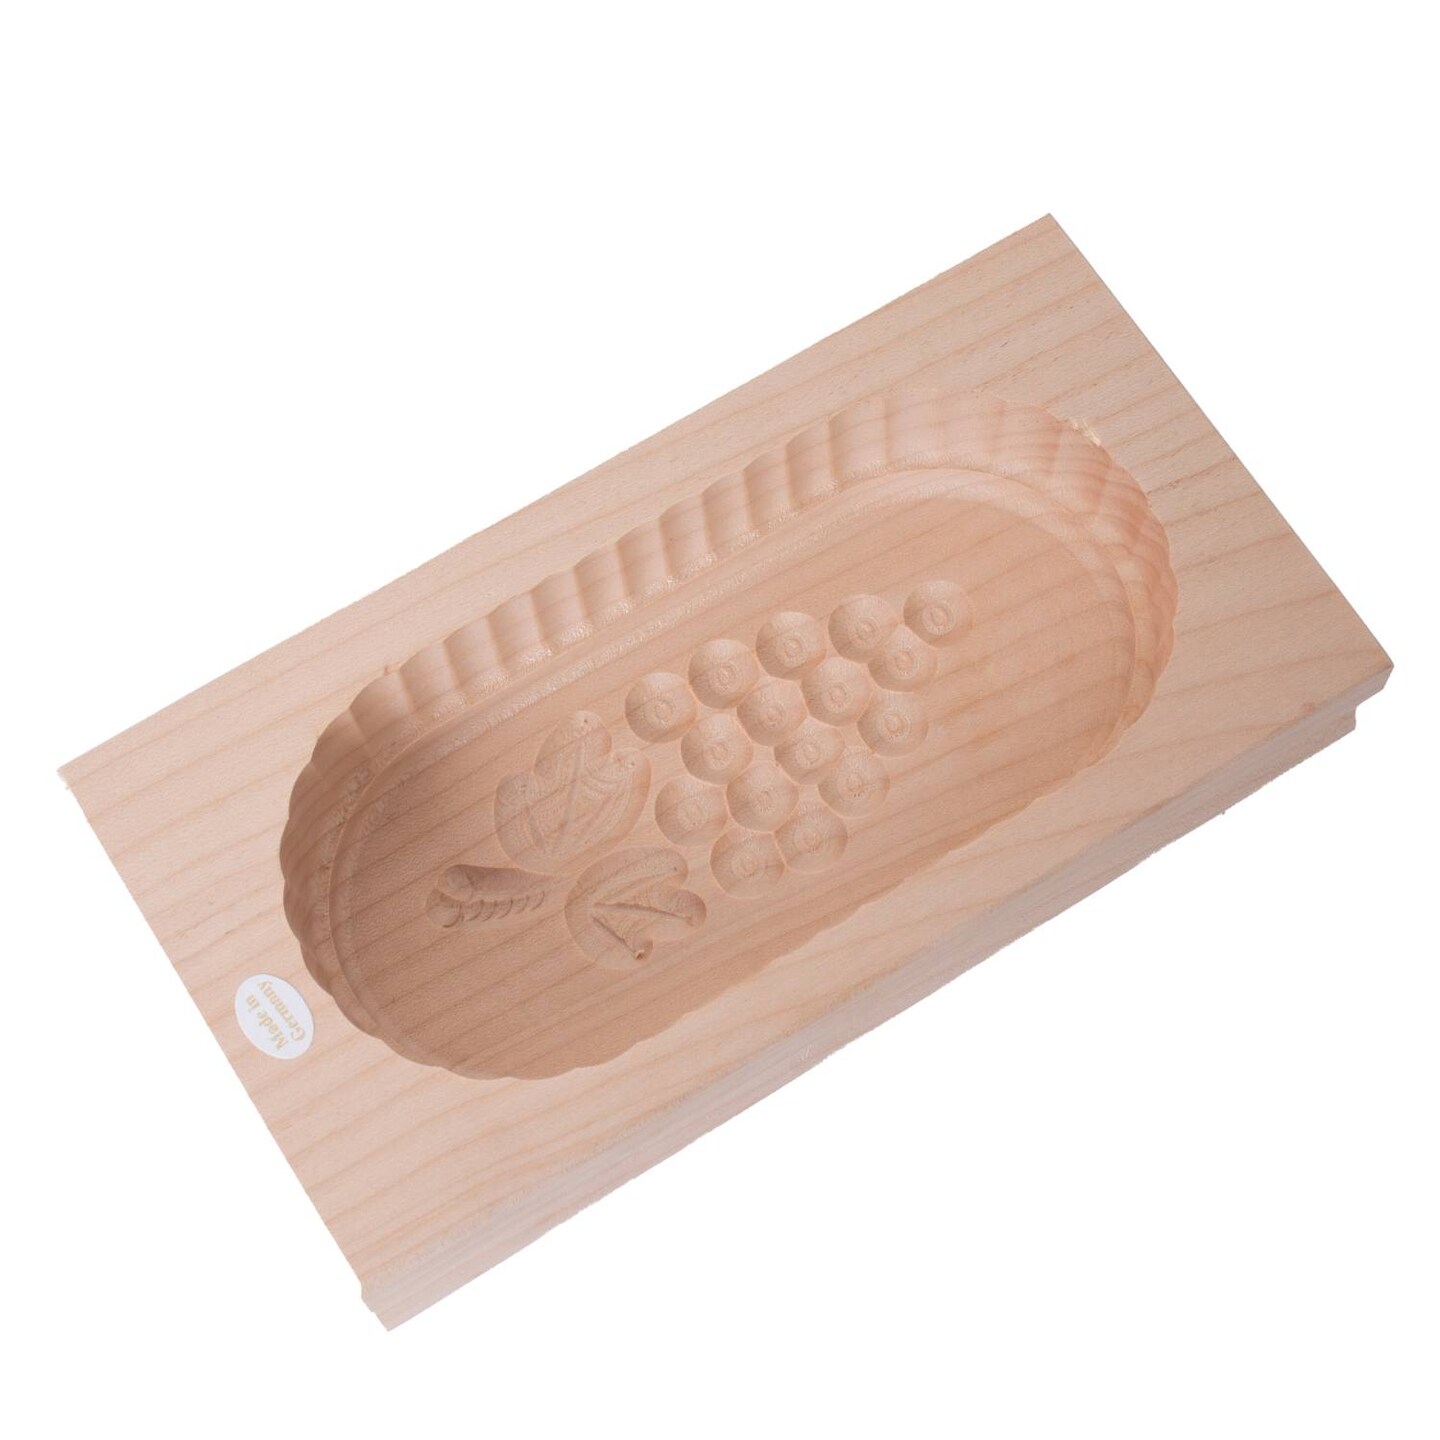 Butter Mold 1/2 pound Maple Hard wood - Hamby Dairy Supply